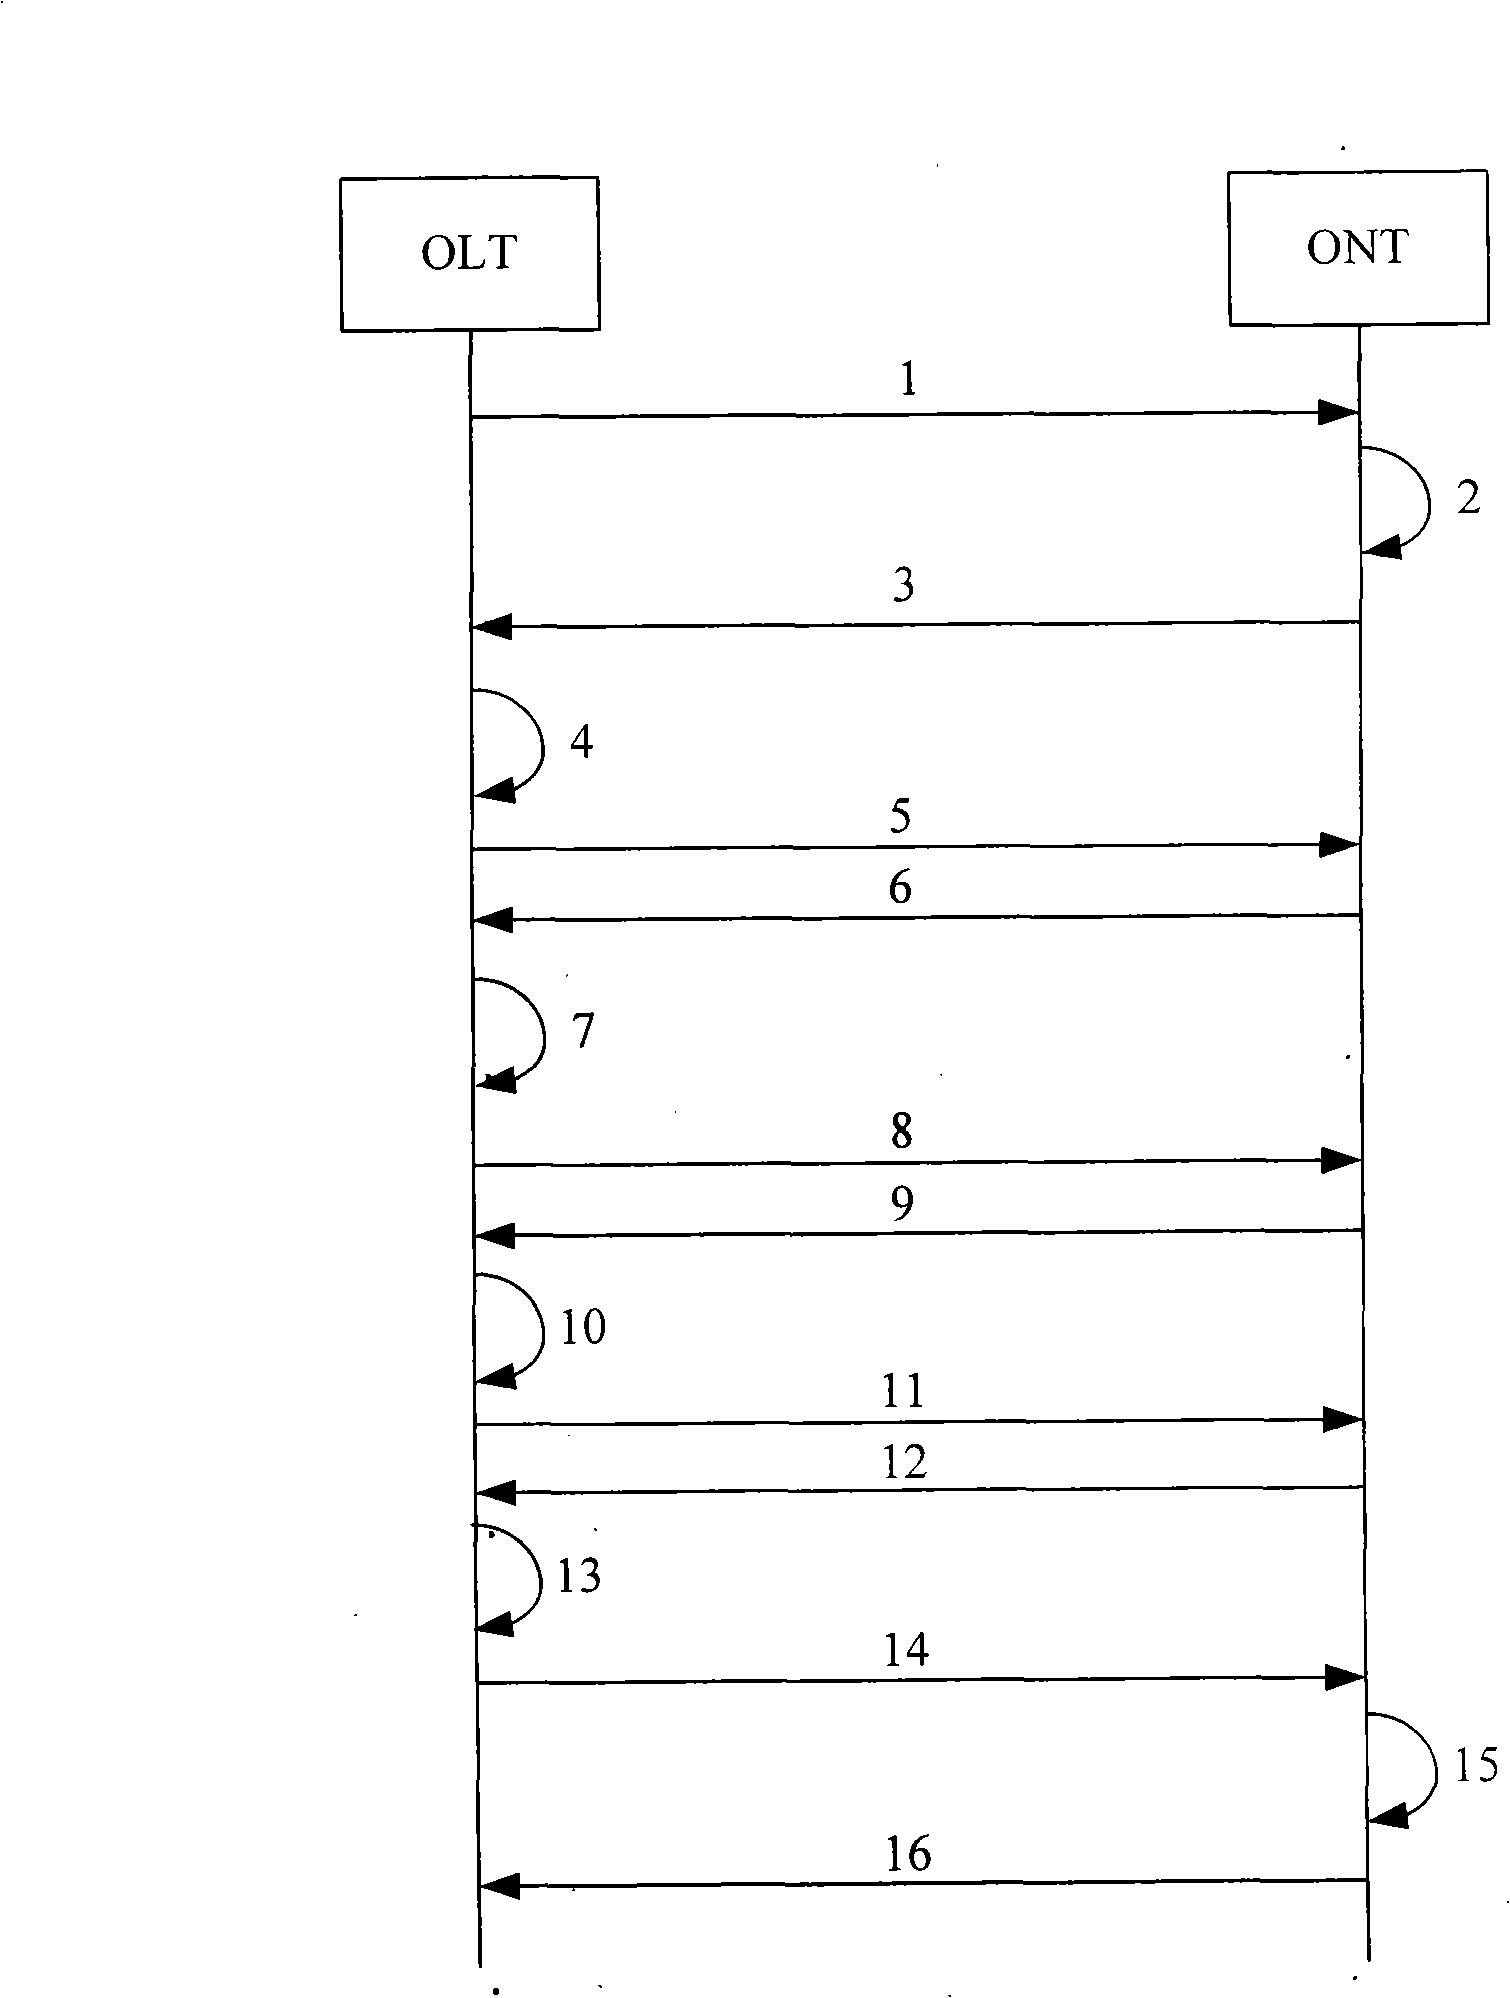 Resource allocation request, method and system of allocation, optical network terminal and optical line terminal